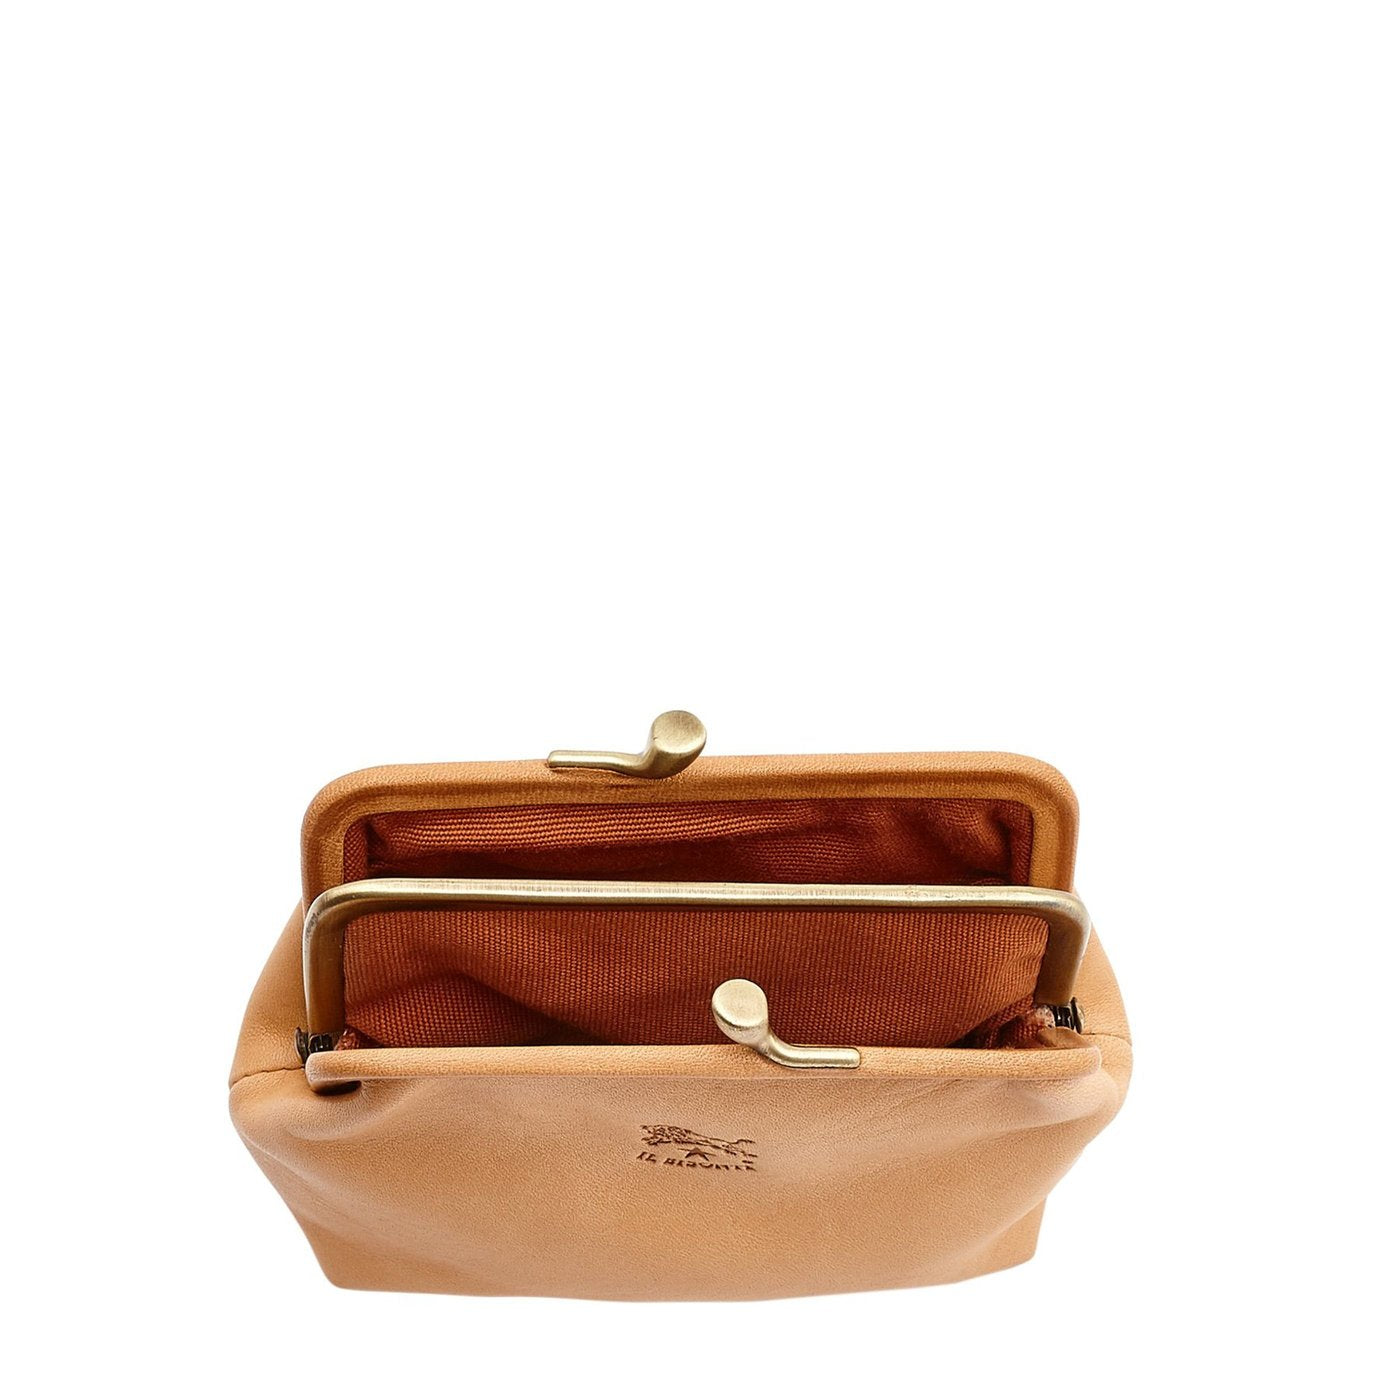 Dual Clasp Leather Coin Purse, Geunine Leather, Features Dual Goldtone  Metal, Snap-Close Exterior Pocket - Measures 5 3/4 Wide x 4 1/4 High 